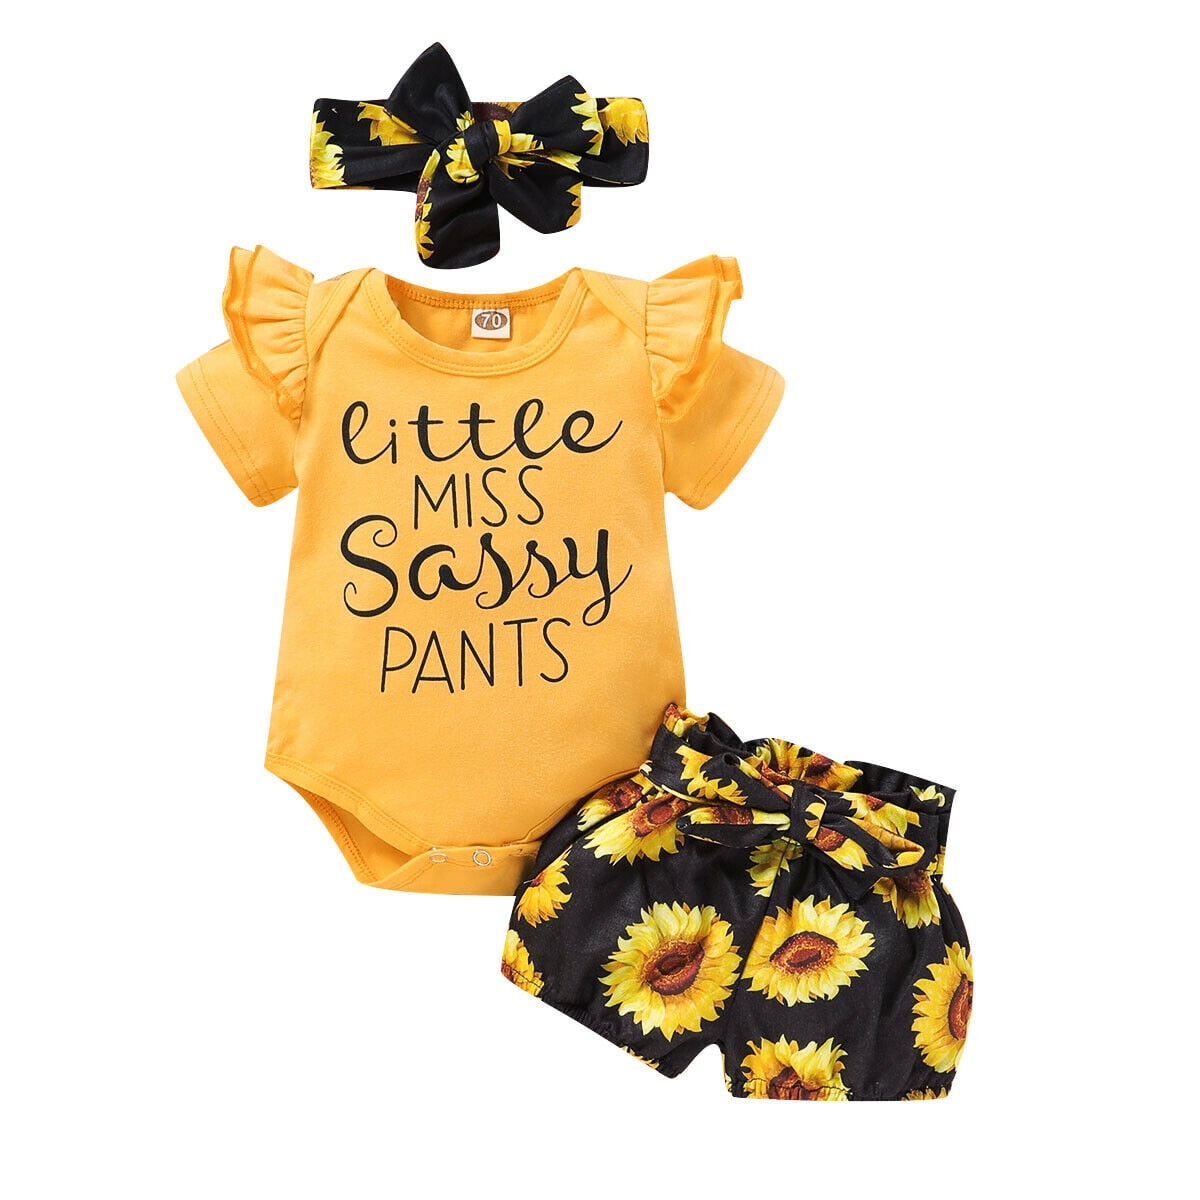 Personalized baby gift Baby name Navy  Sunflower Floral Print Coming Home Outfit baby girl outfit newborn outfit custom baby gift